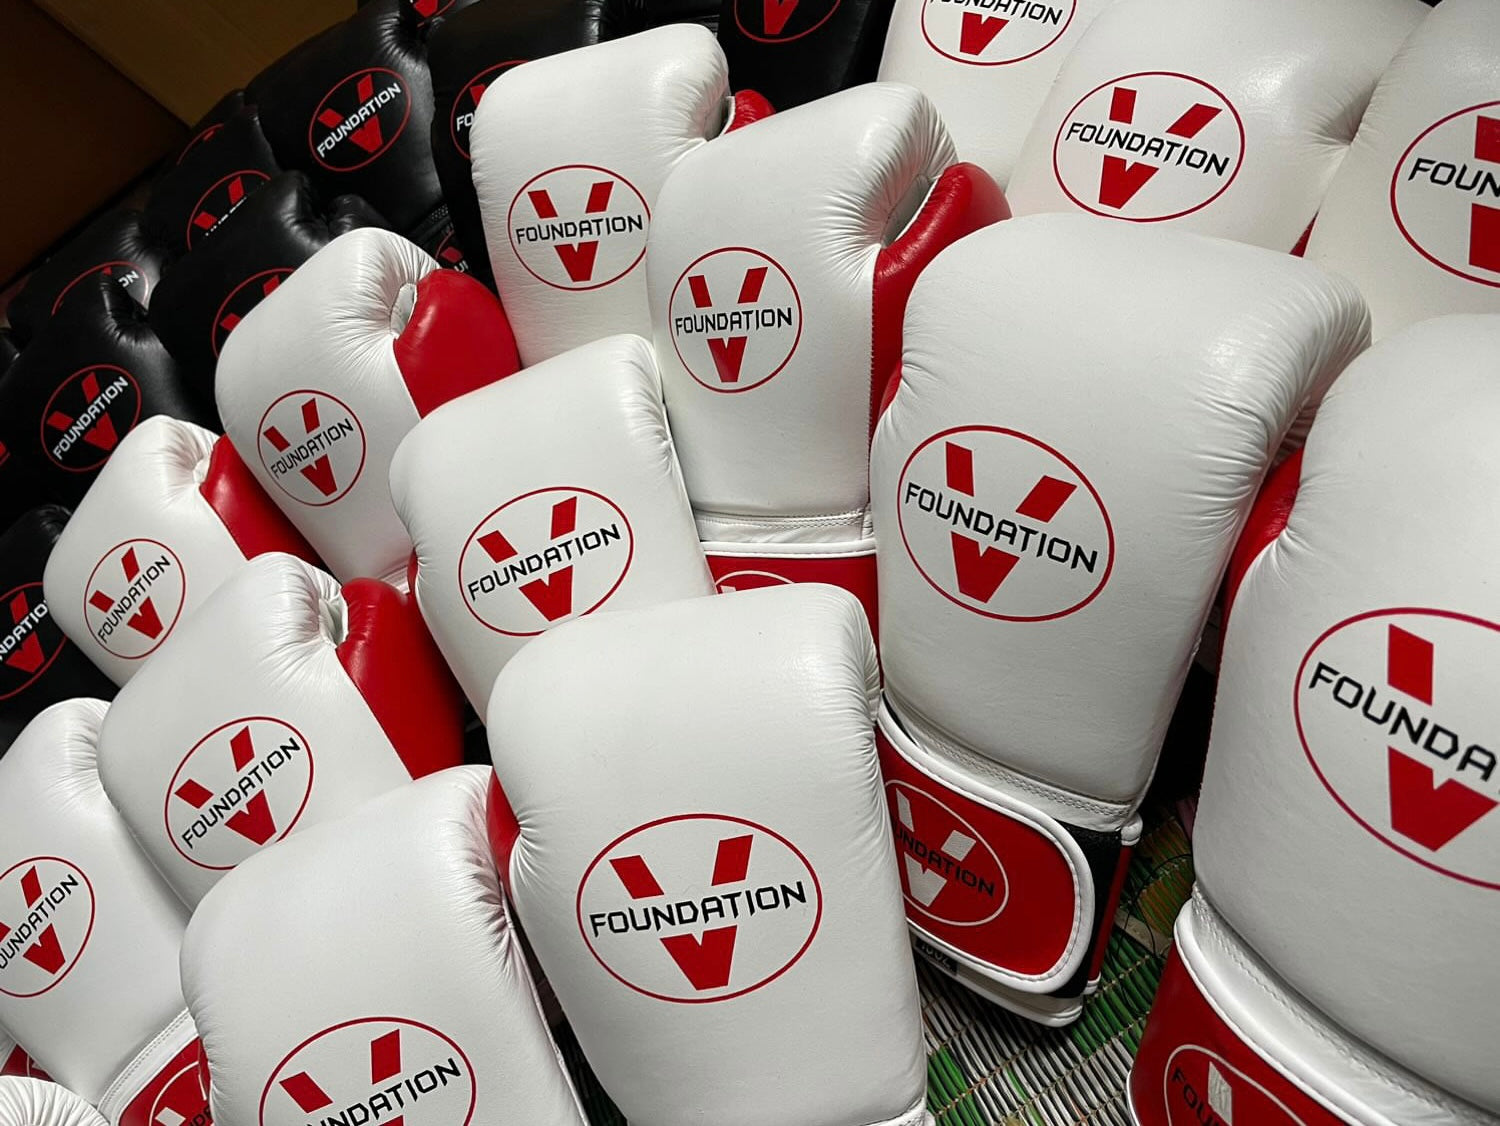 this primarily white boxing gloves are perfect to show off Foundation V as your gym but, the quality is the reason to buy. You are able to train with boxing gloves just for you. You have a secure fit awith the durable construction to last.  16oz is the optical weight for being able to train efficiently the standard.